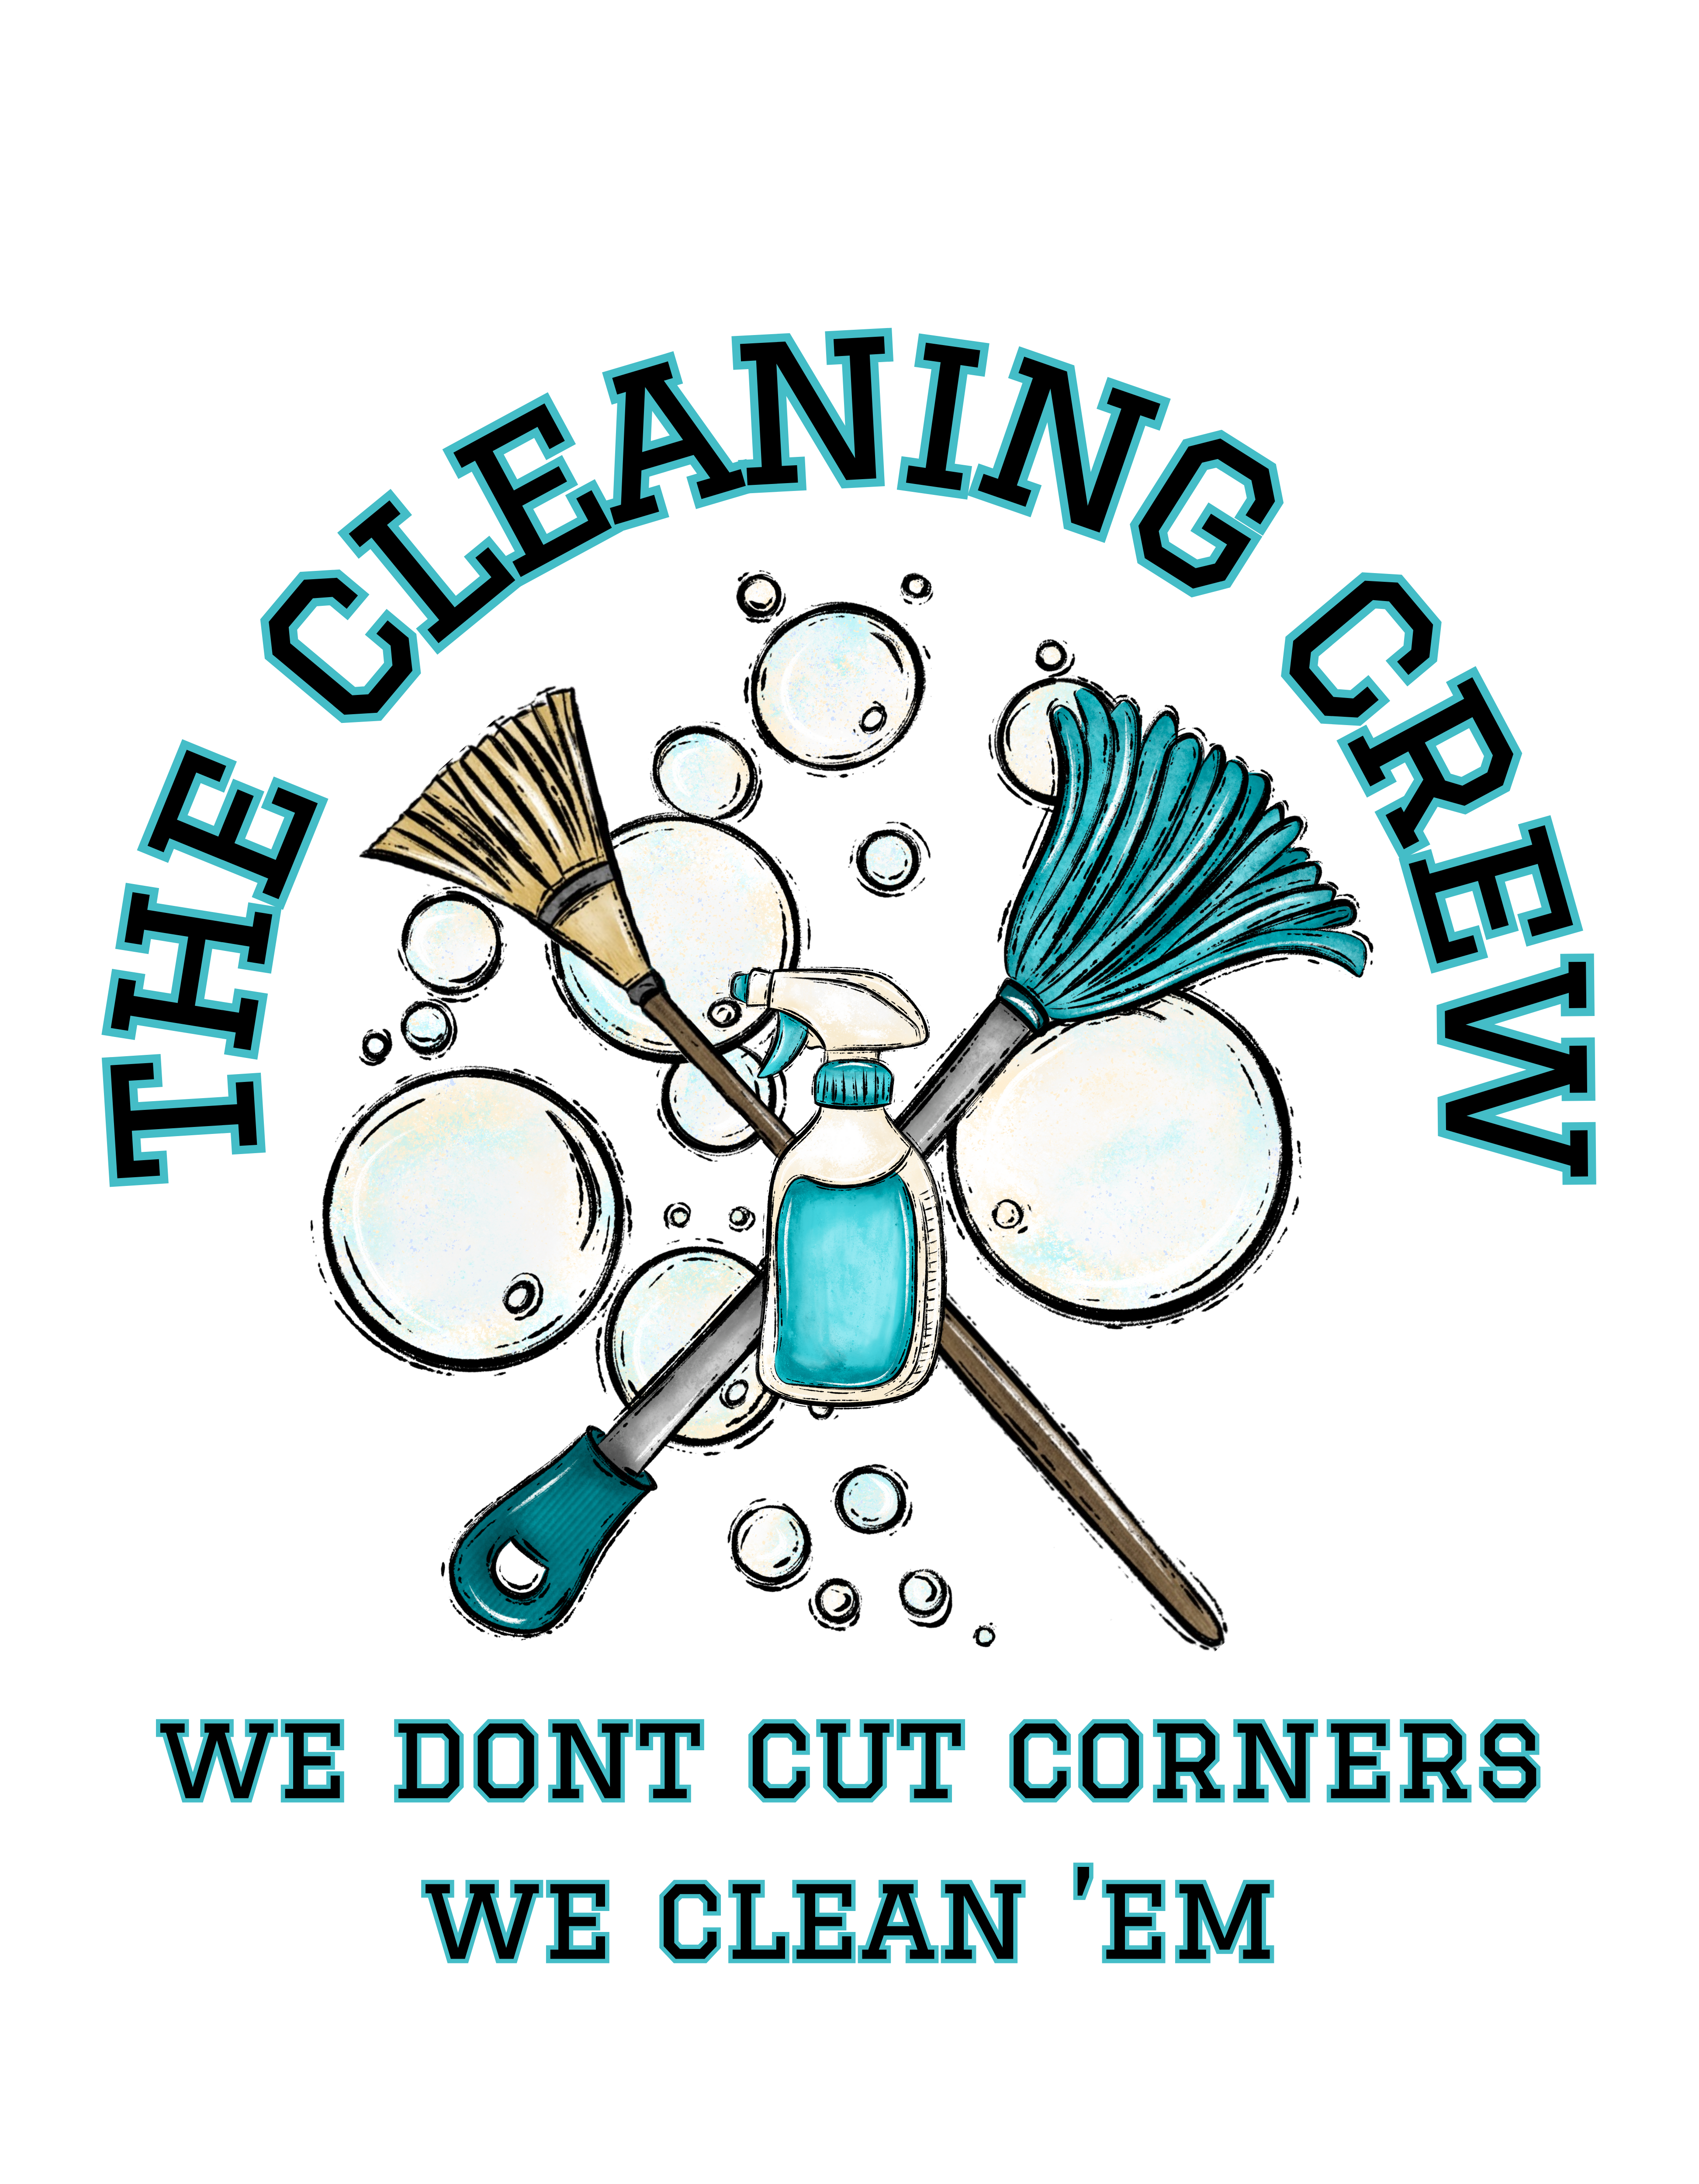 The Cleaning Crew Logo